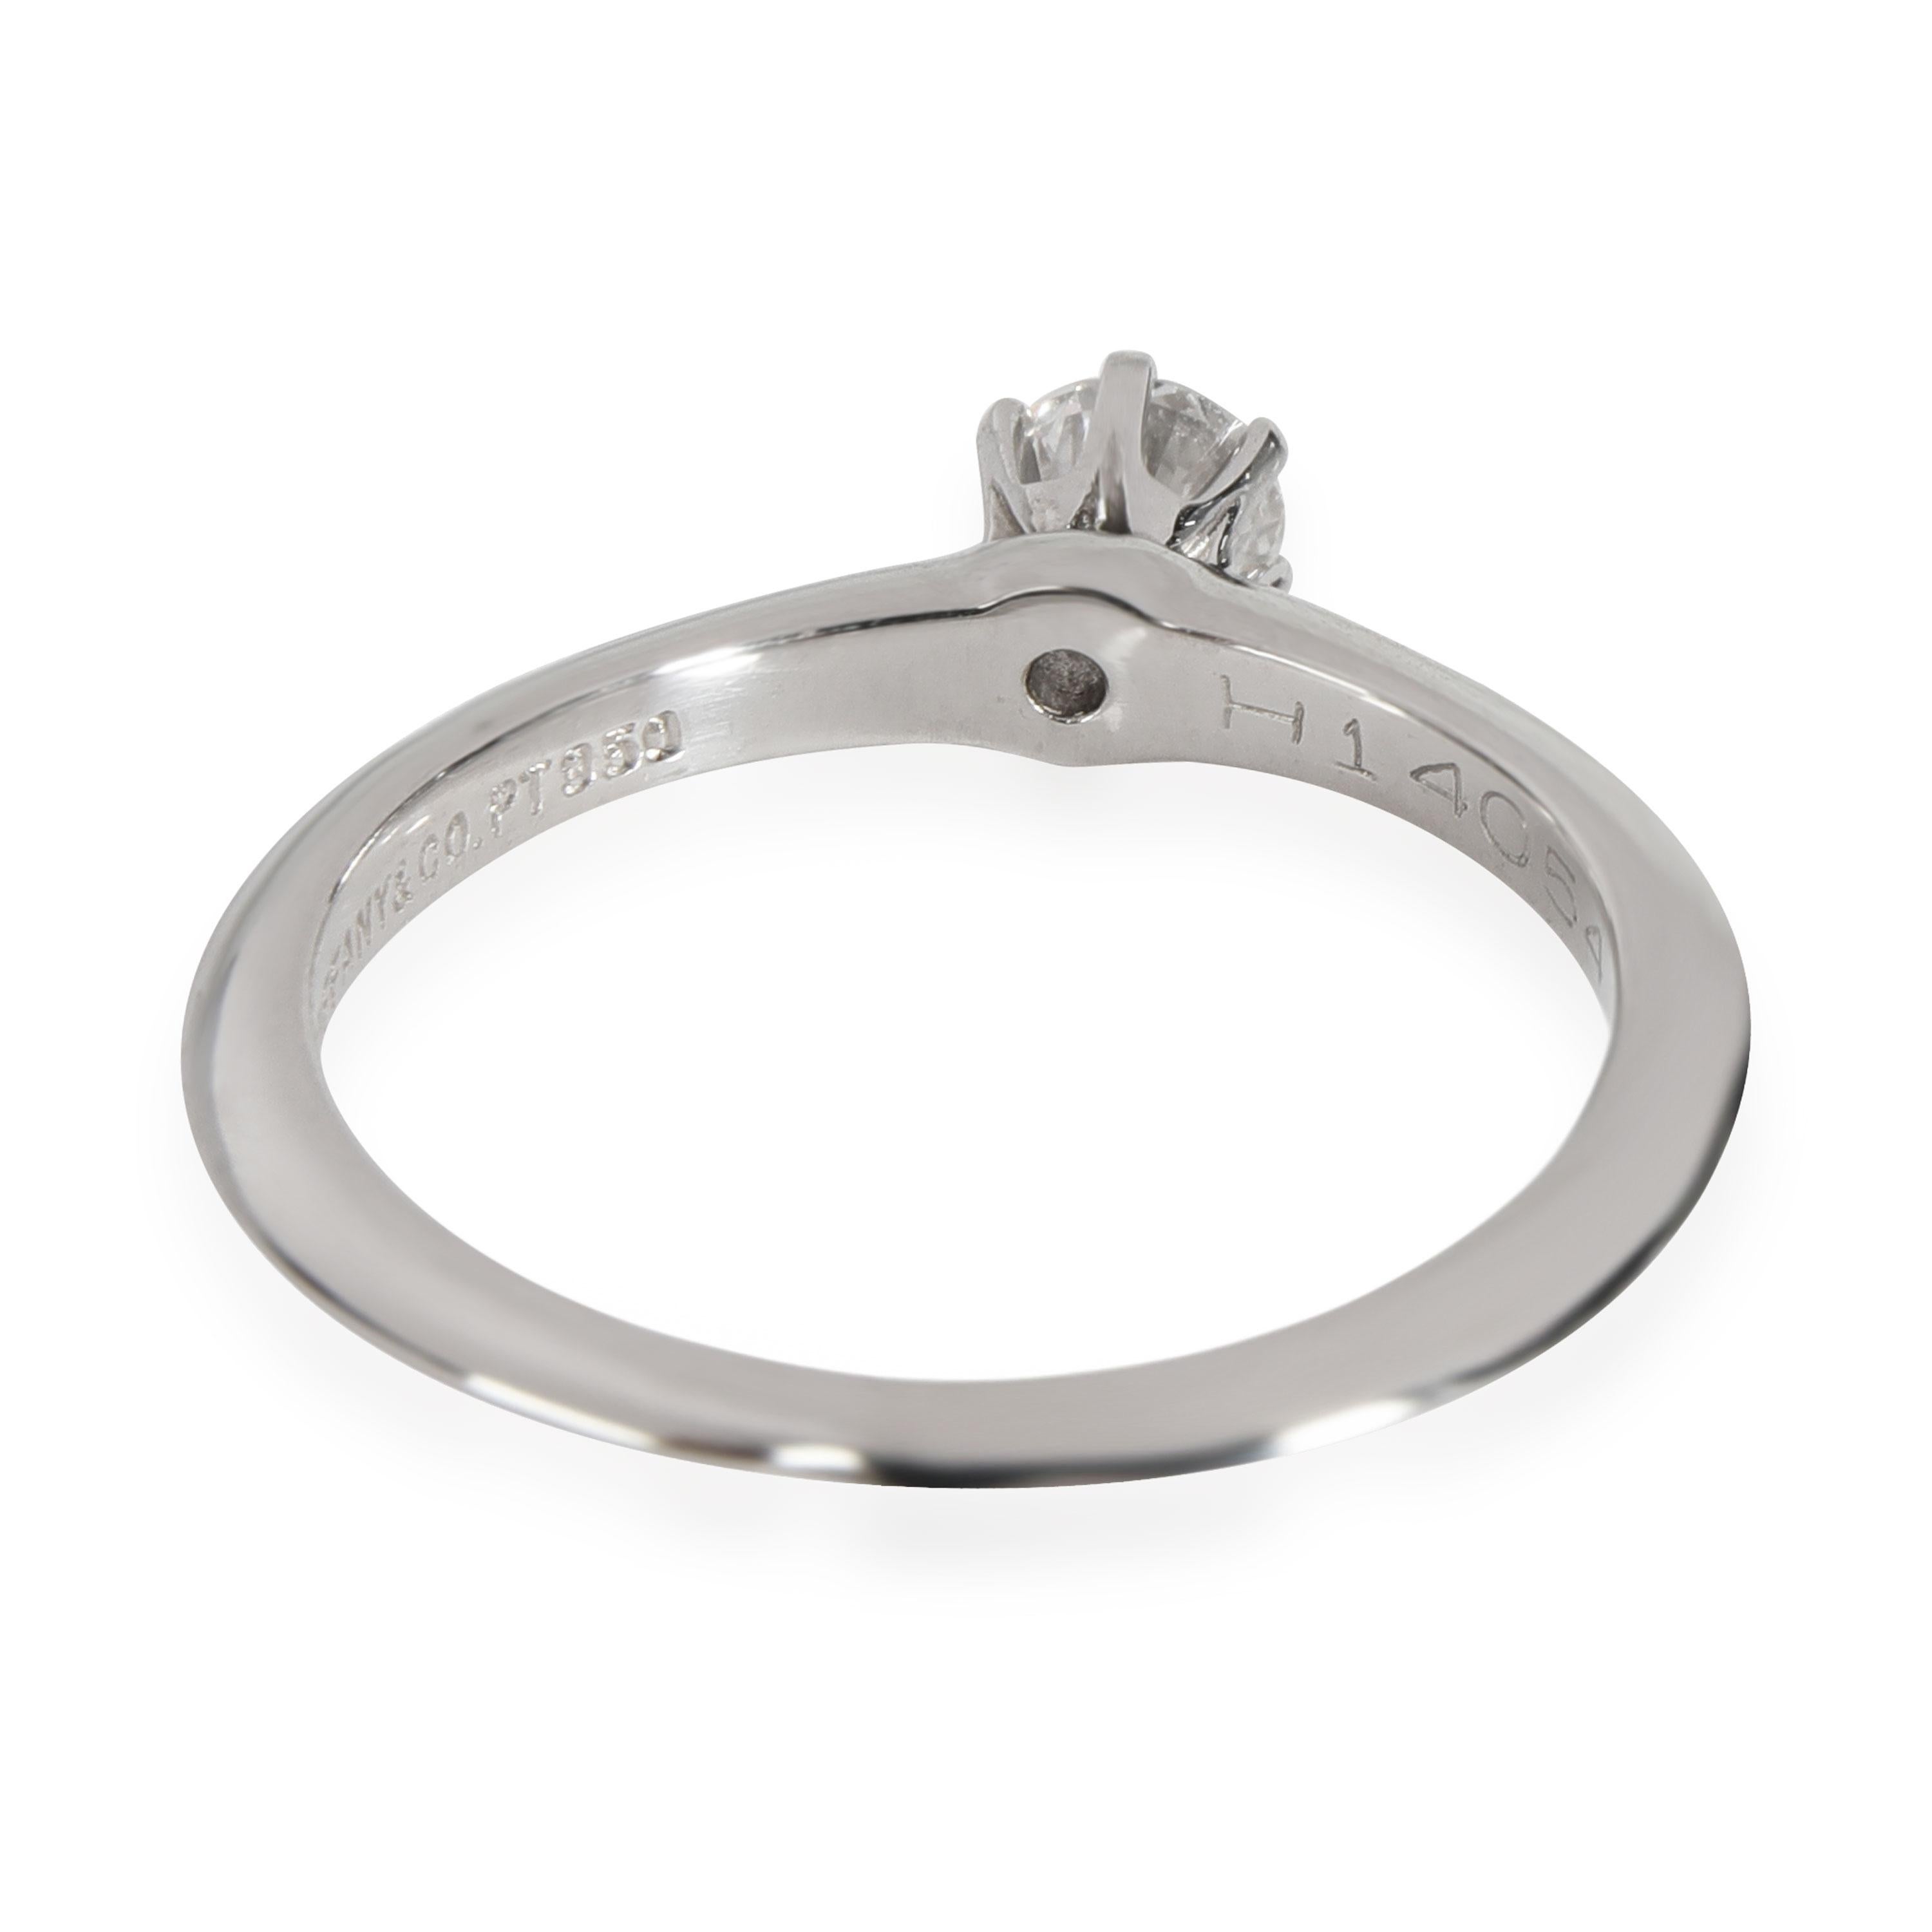 Tiffany & Co. Solitaire Diamond Engagement Ring in Platinum G VS1 0.22 CTW

PRIMARY DETAILS
SKU: 112121
Listing Title: Tiffany & Co. Solitaire Diamond Engagement Ring in Platinum G VS1 0.22 CTW
Condition Description: Retails for 1880 USD. In